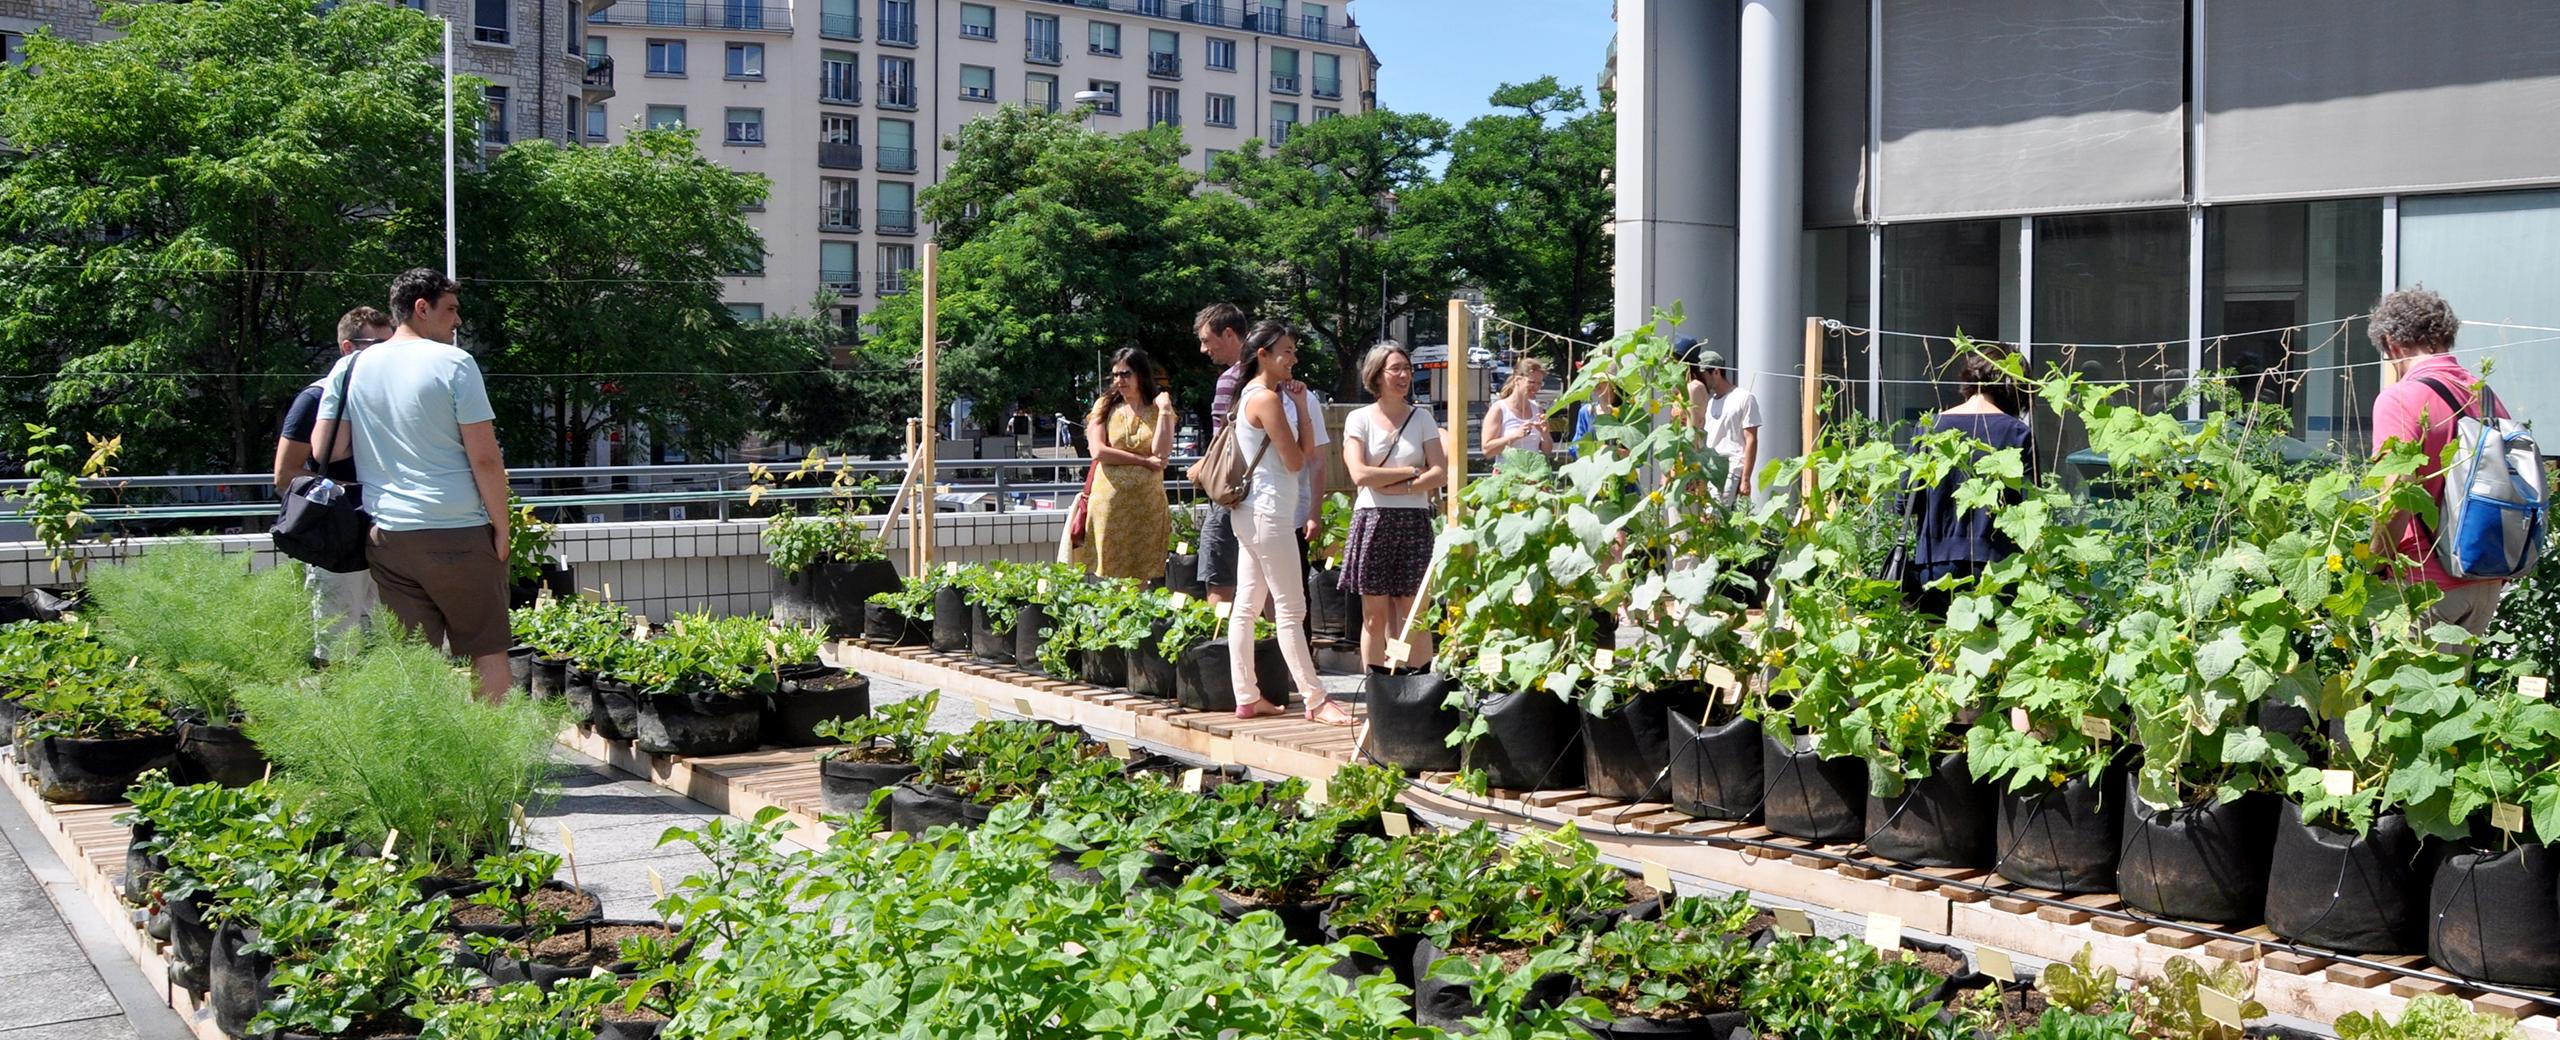 Potential for growing vegetables and fruit in the city